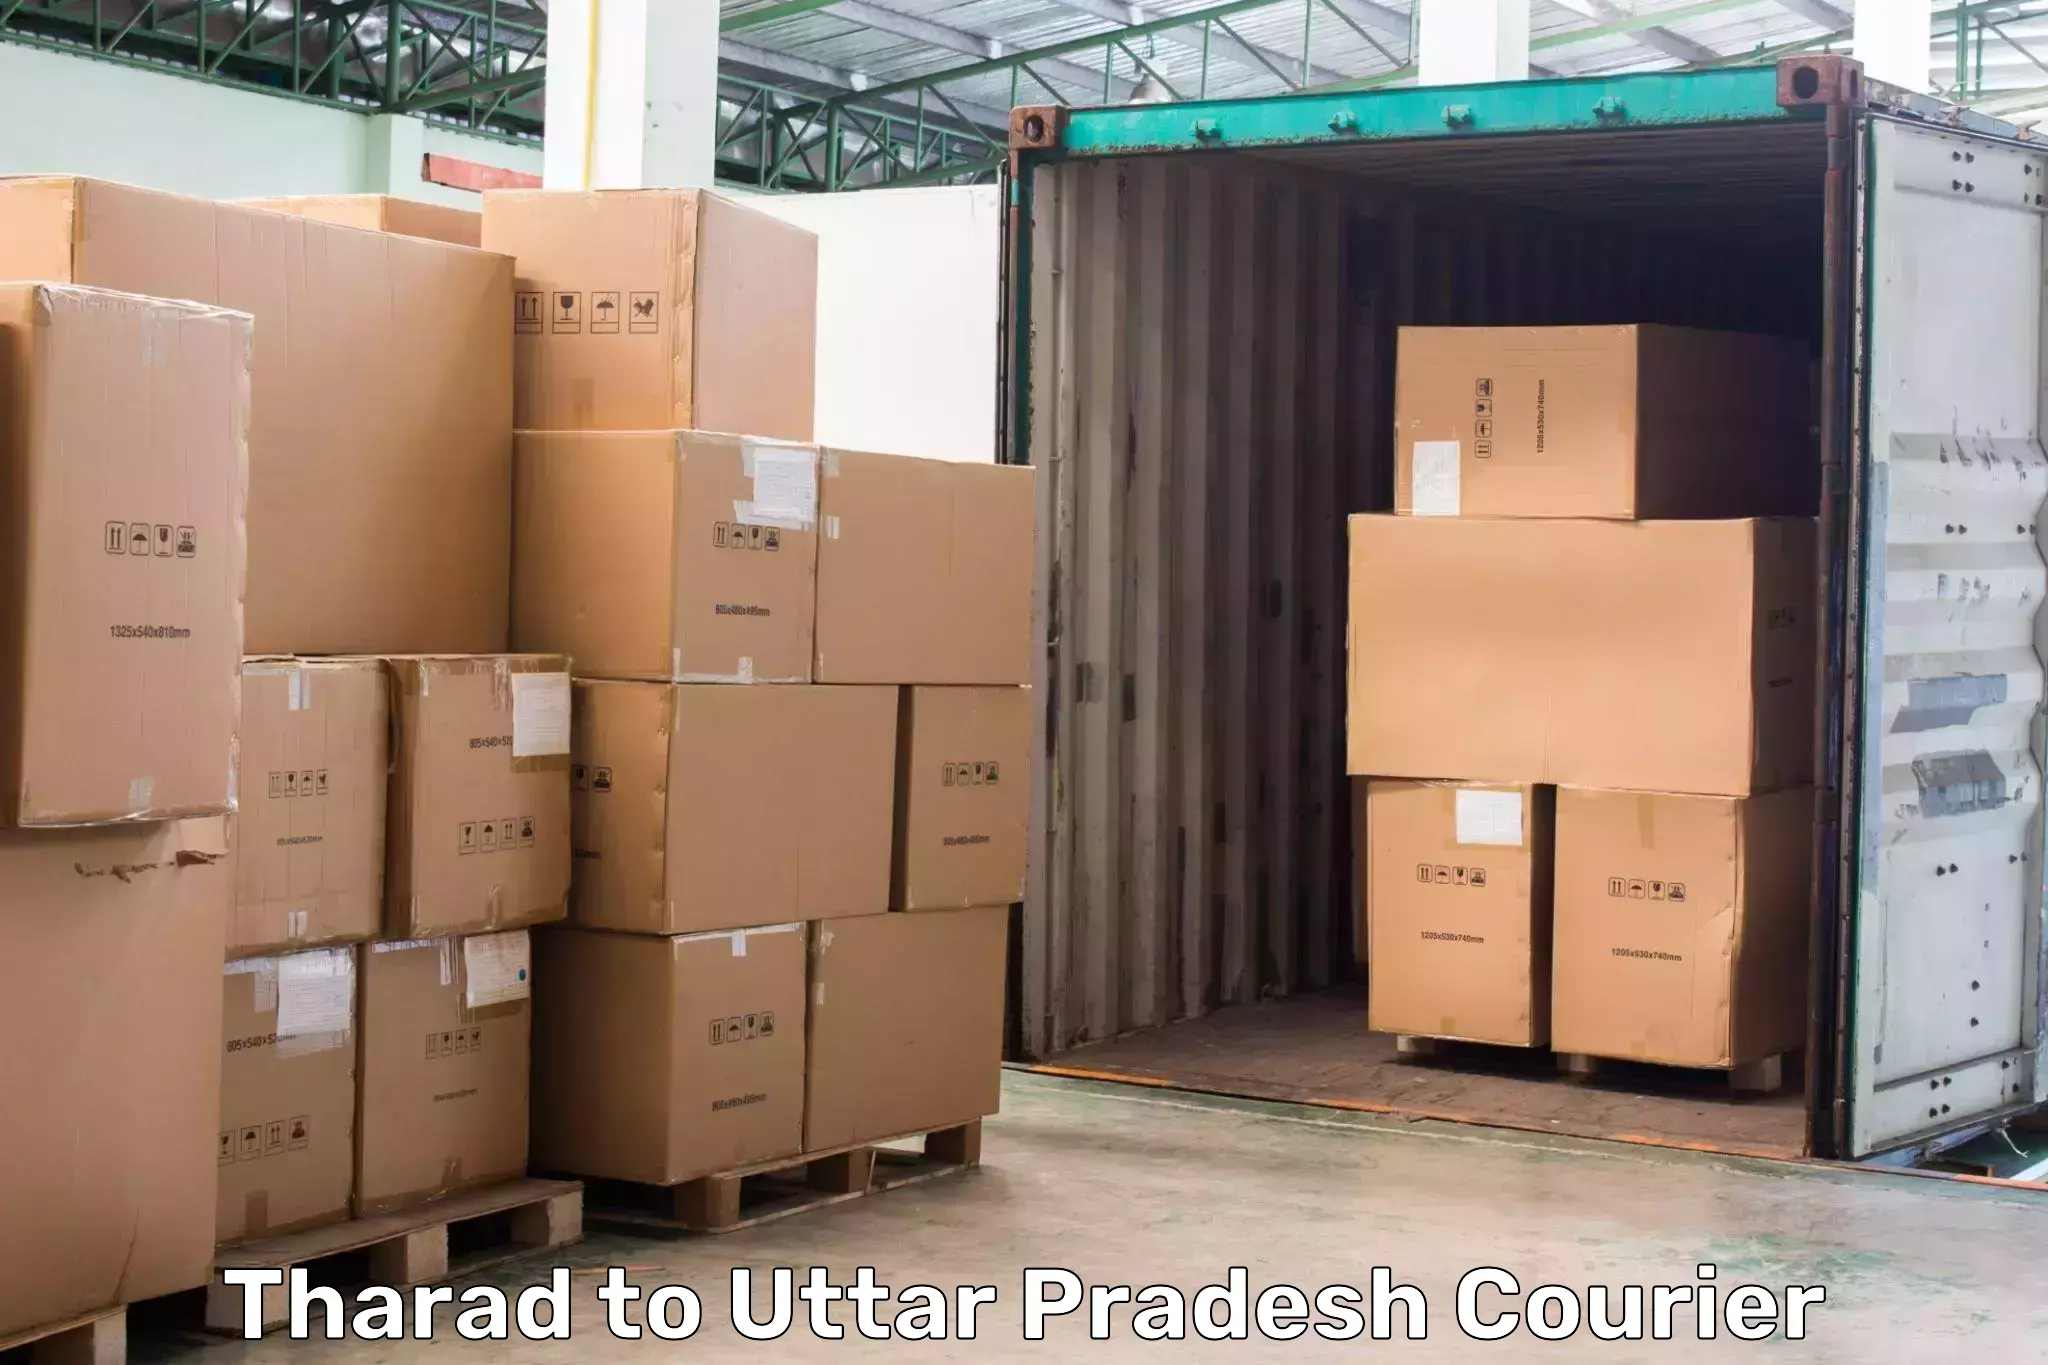 24/7 courier service in Tharad to Uttar Pradesh